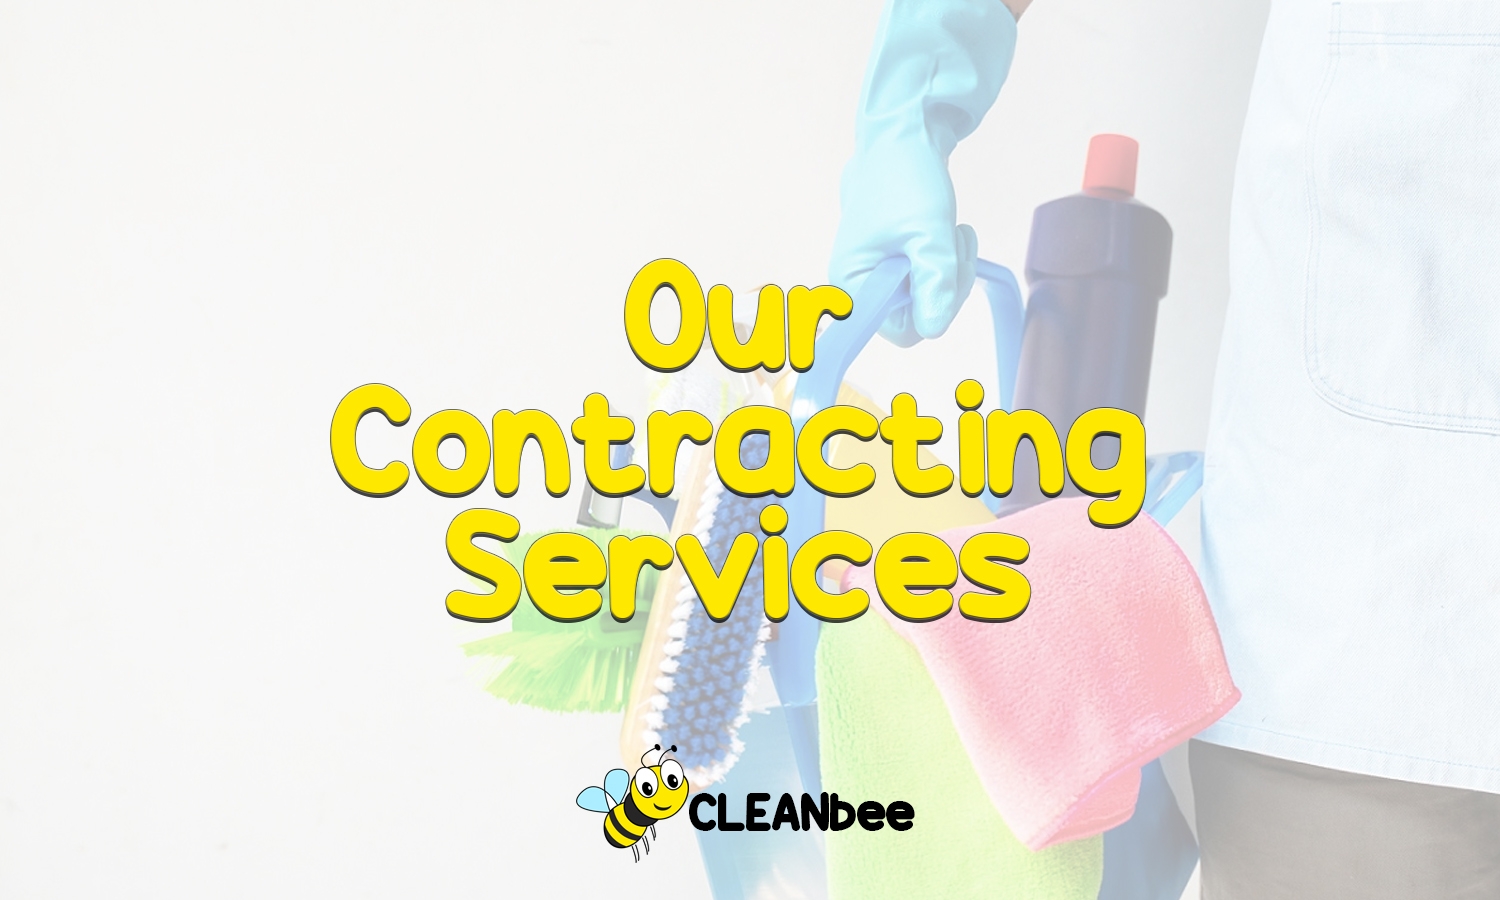 Our Contracting Services